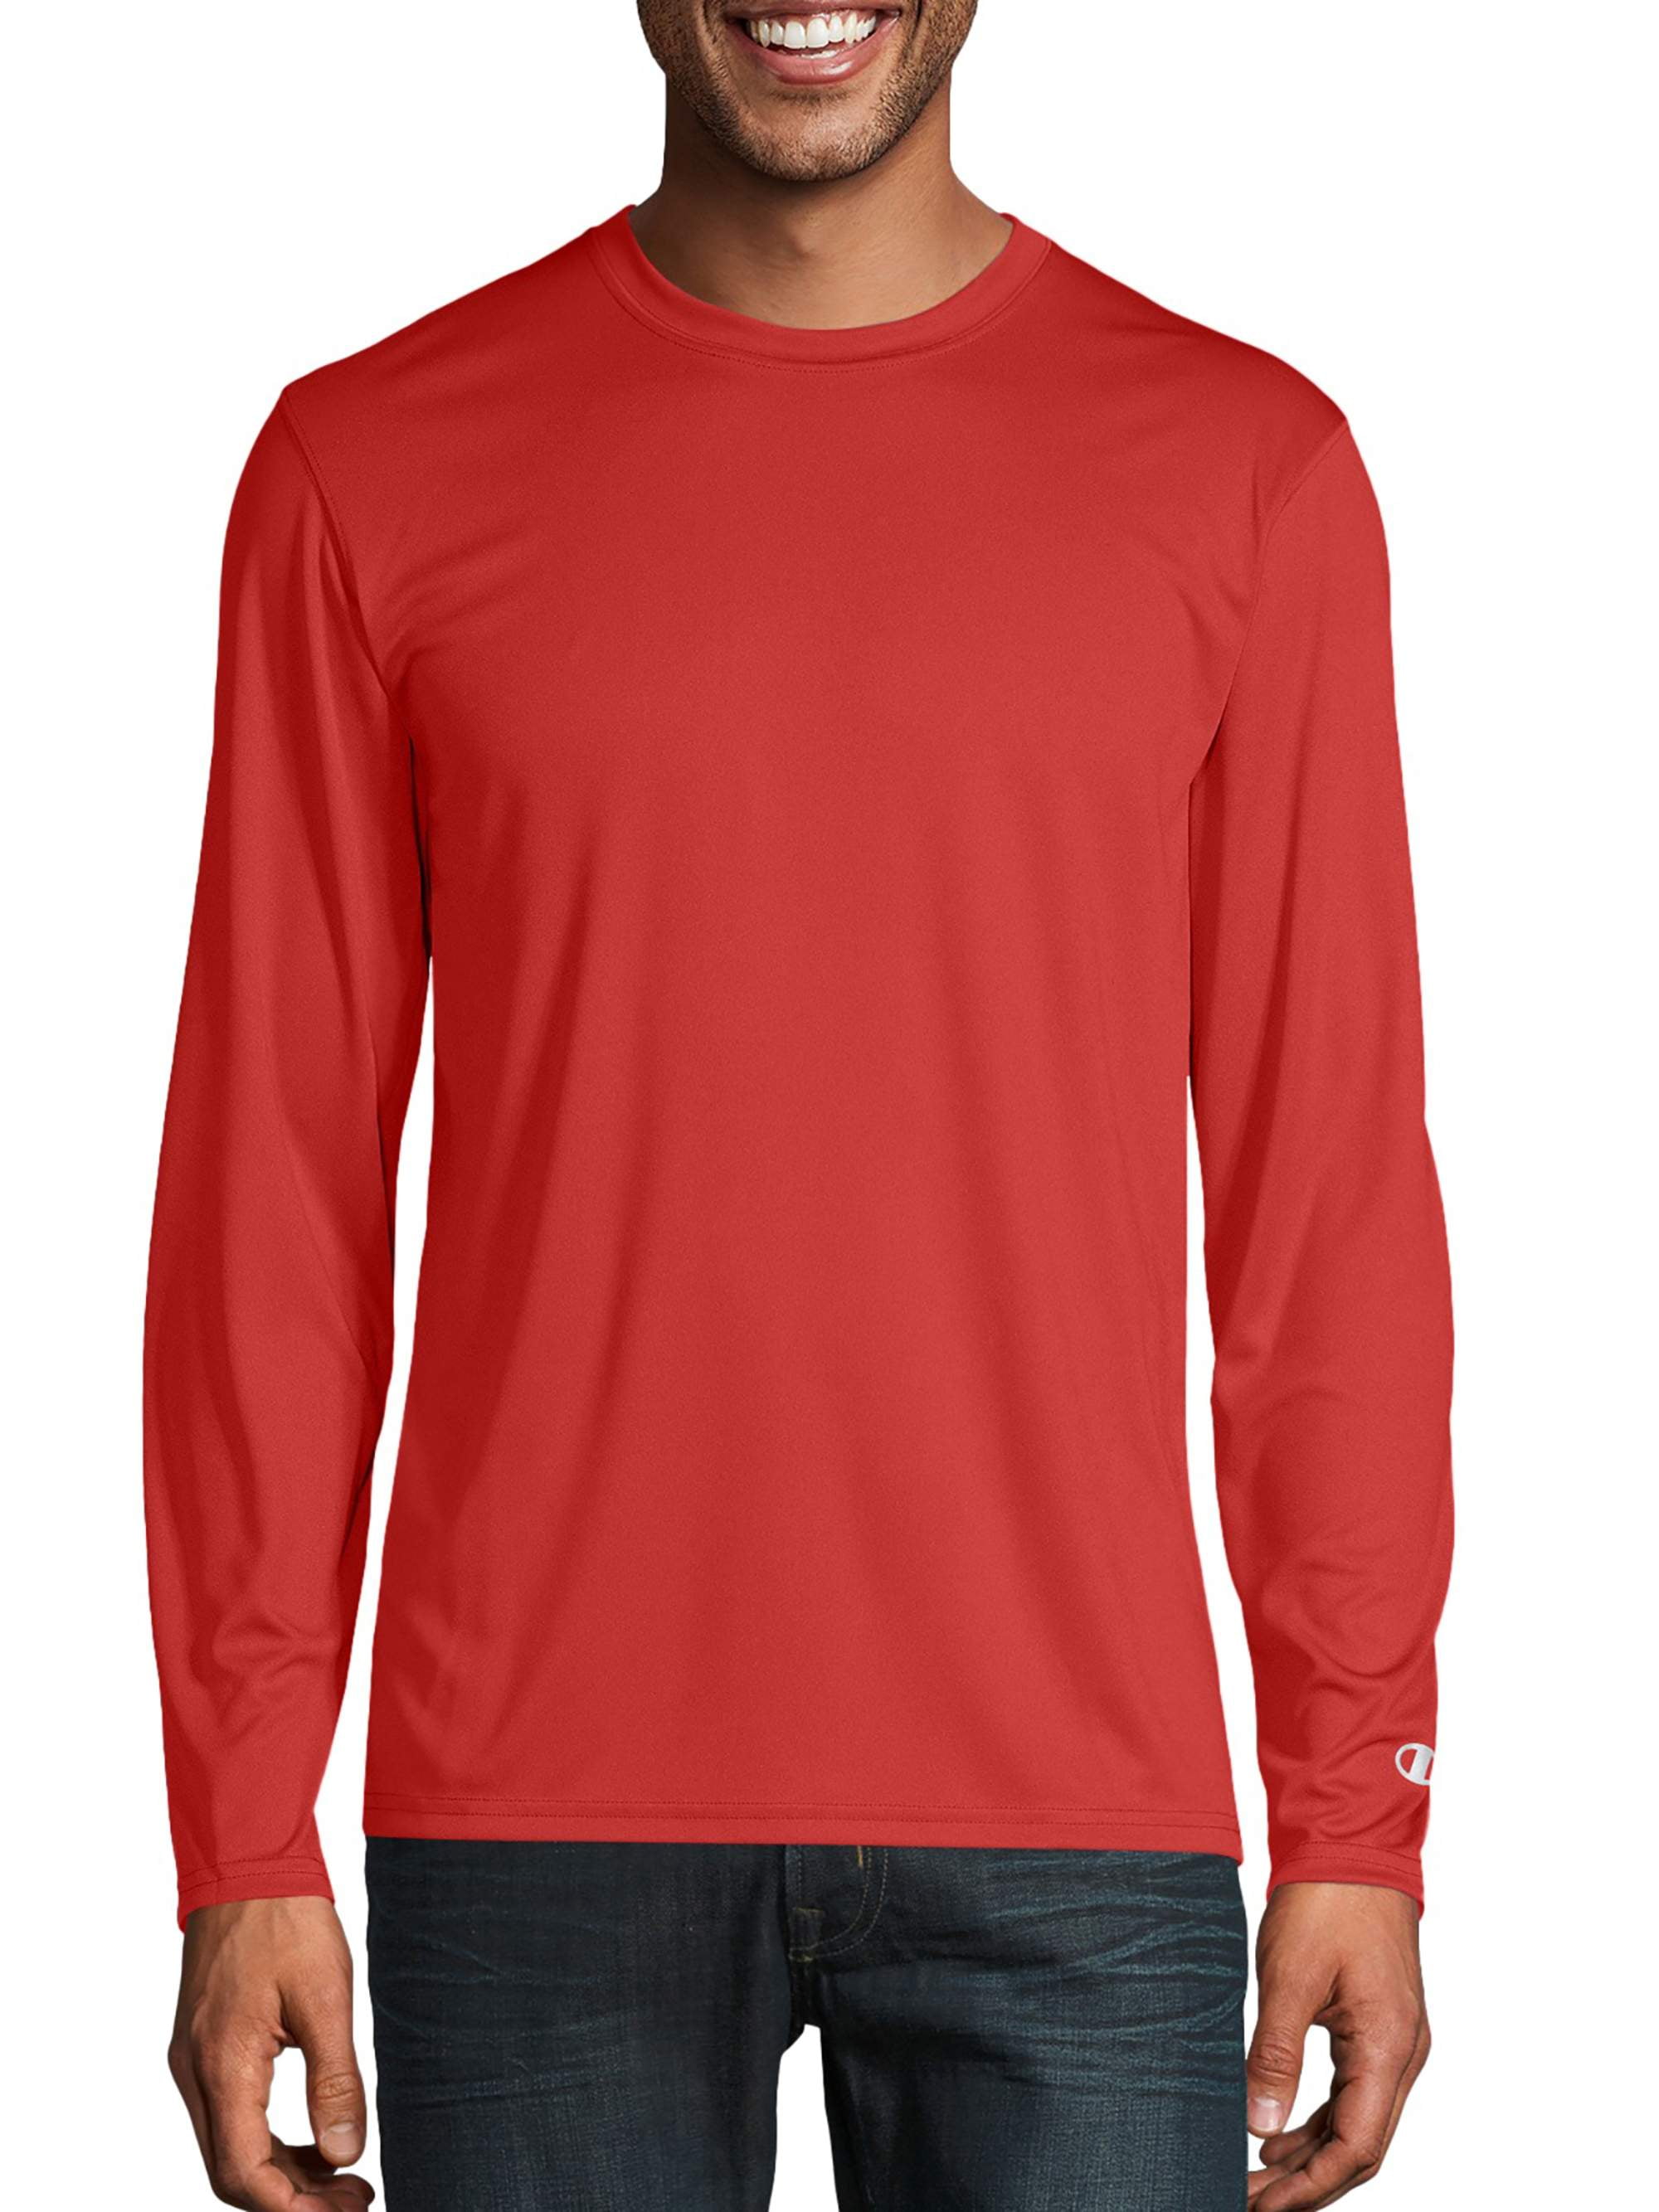 Champion Men's Long Sleeve Performance T-Shirt, up to Size 3XL 